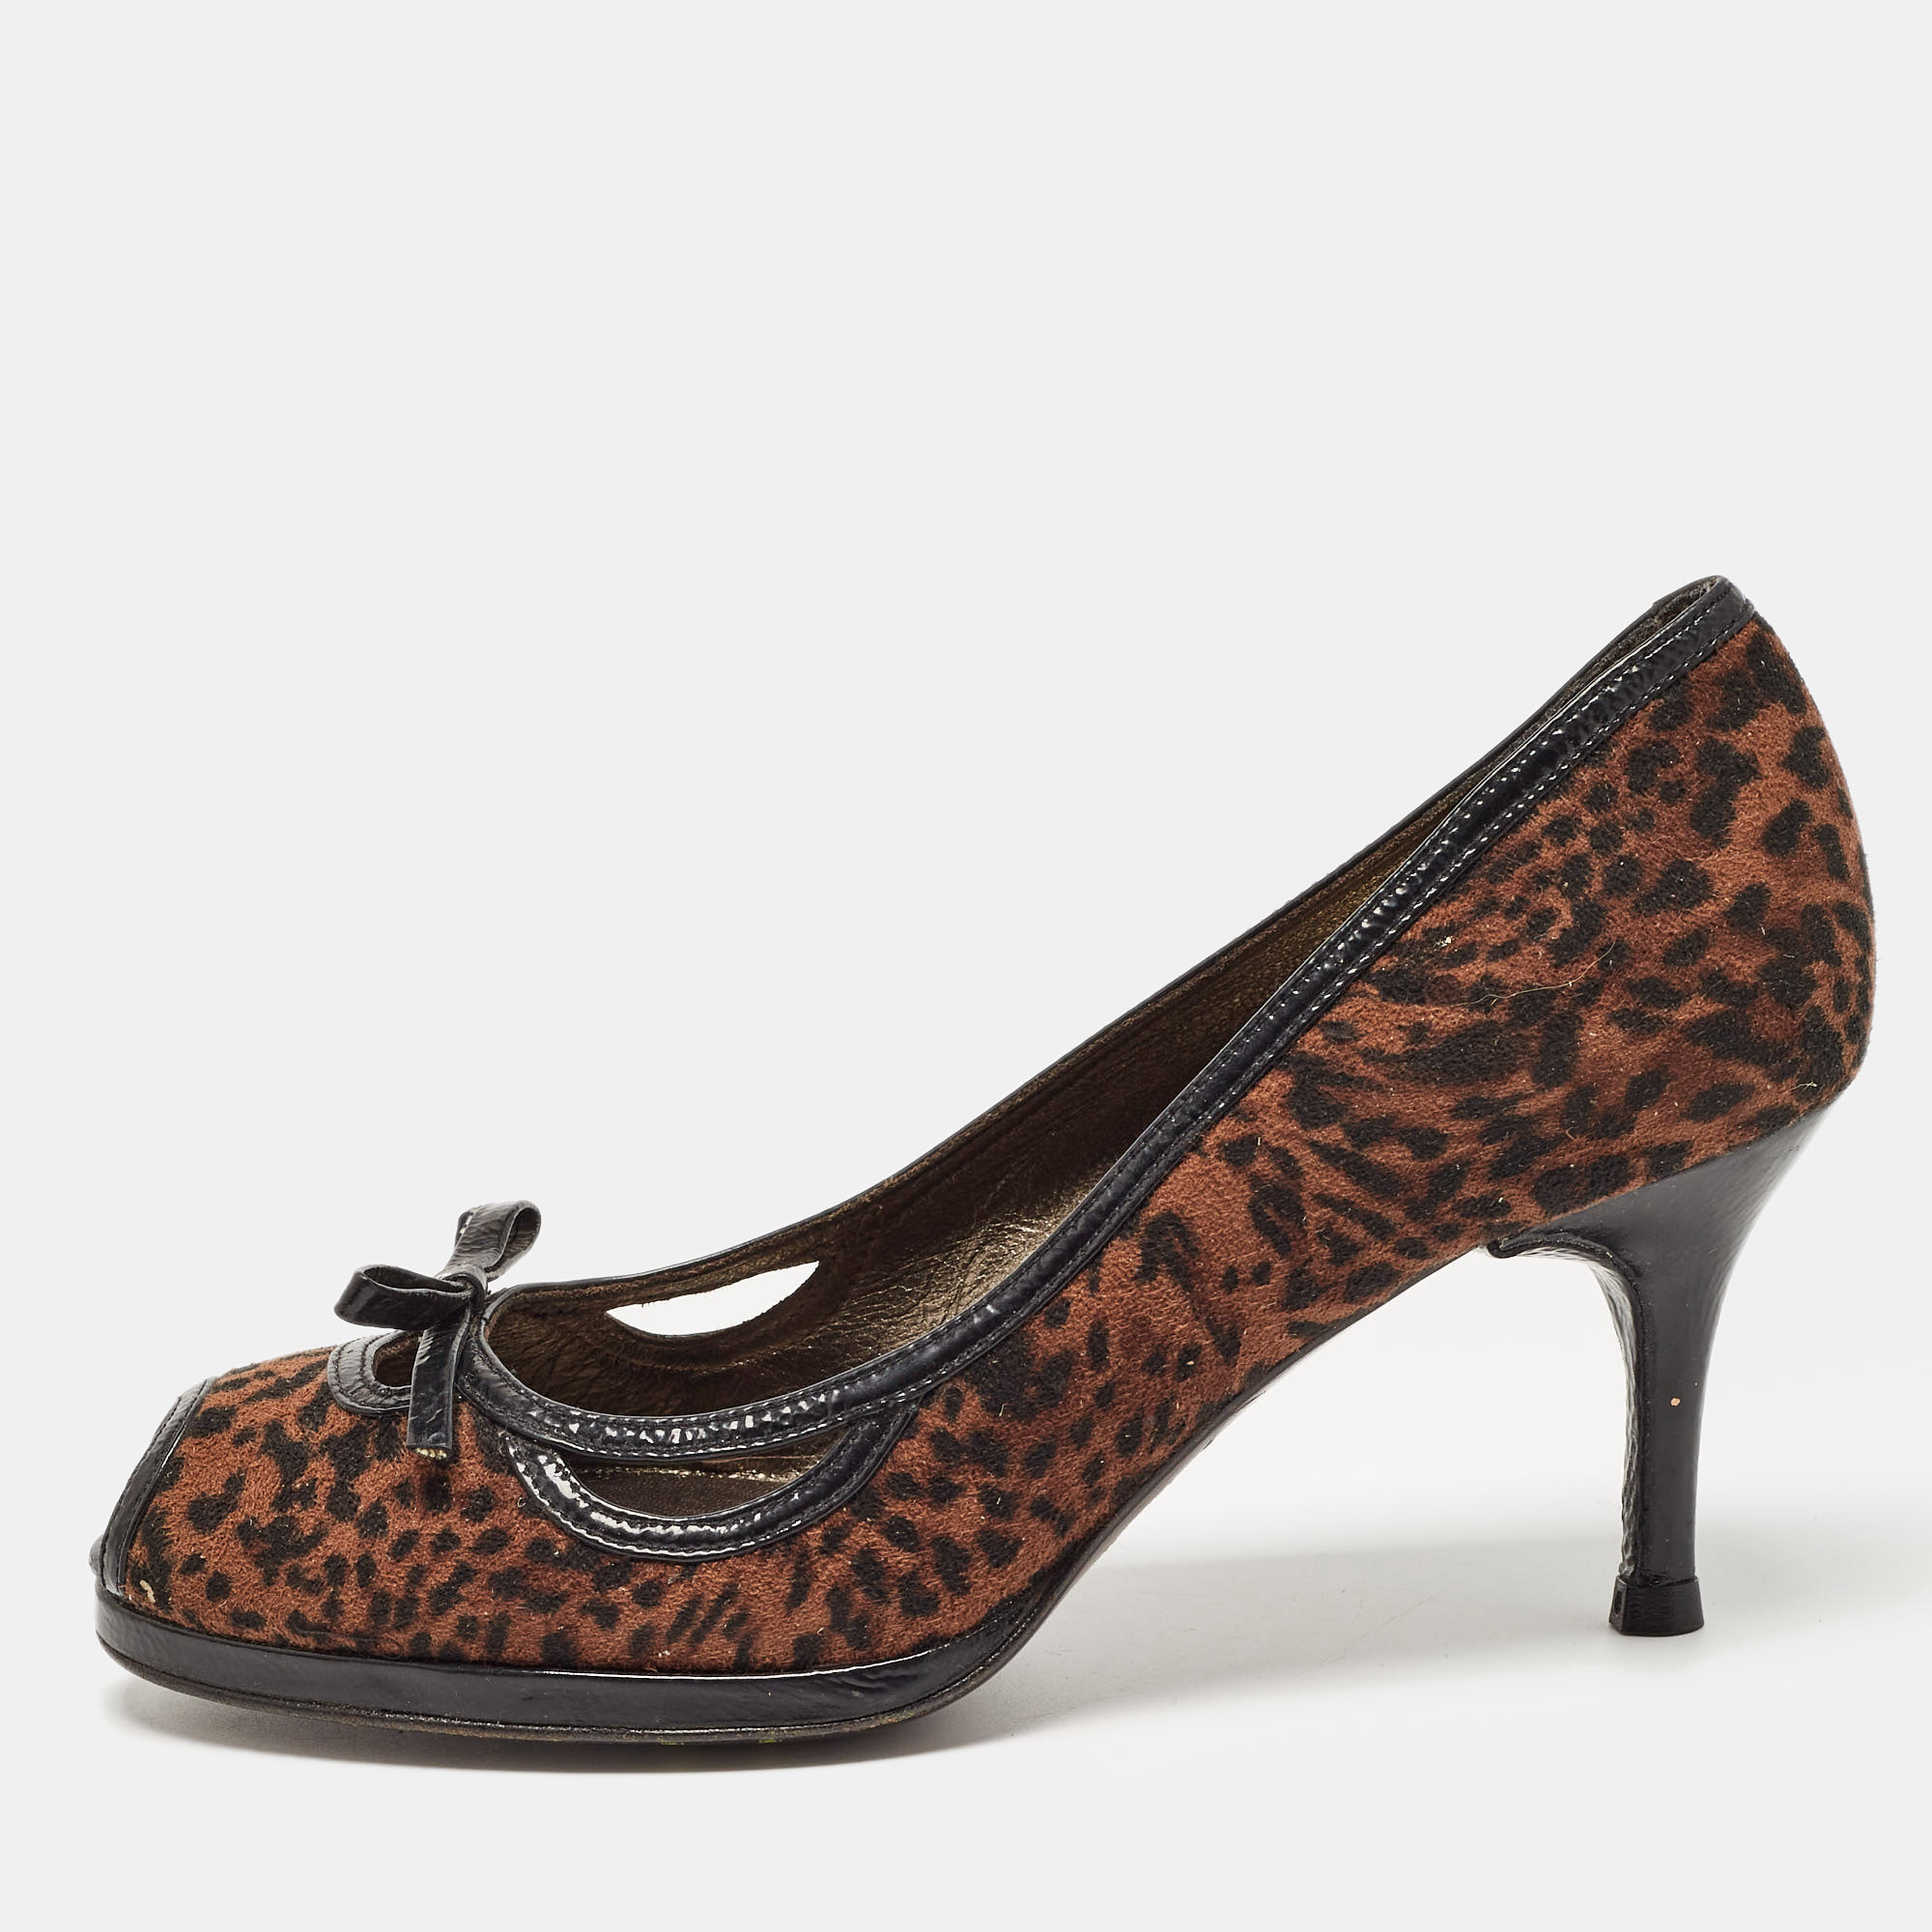 Pre-owned Stuart Weitzman Black/brown Leopard Suede And Patent Leather Bow Peep Toe Pumps Size 36.5